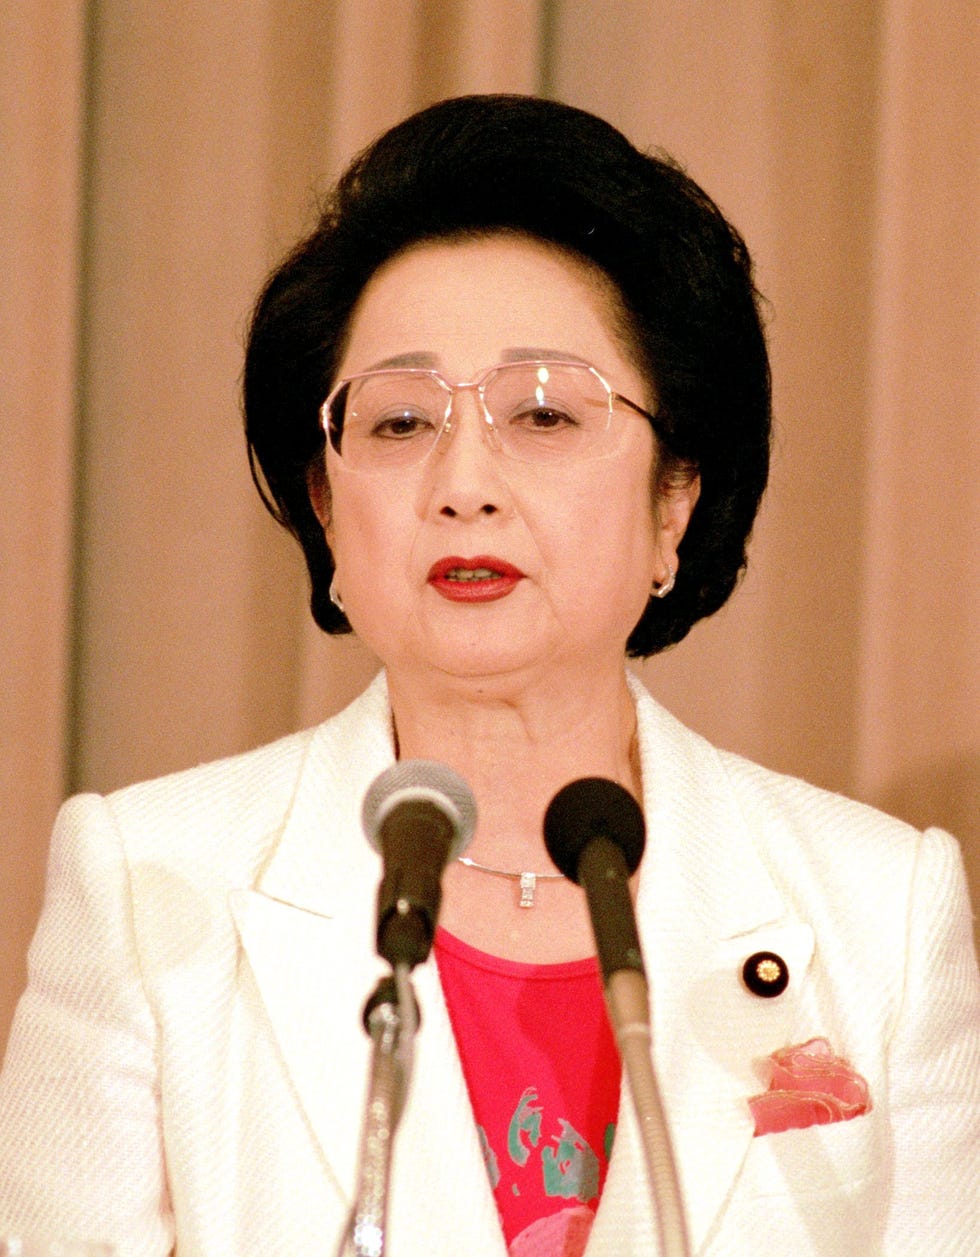 upcoming general elections in tokyo, japan on june 12, 2000